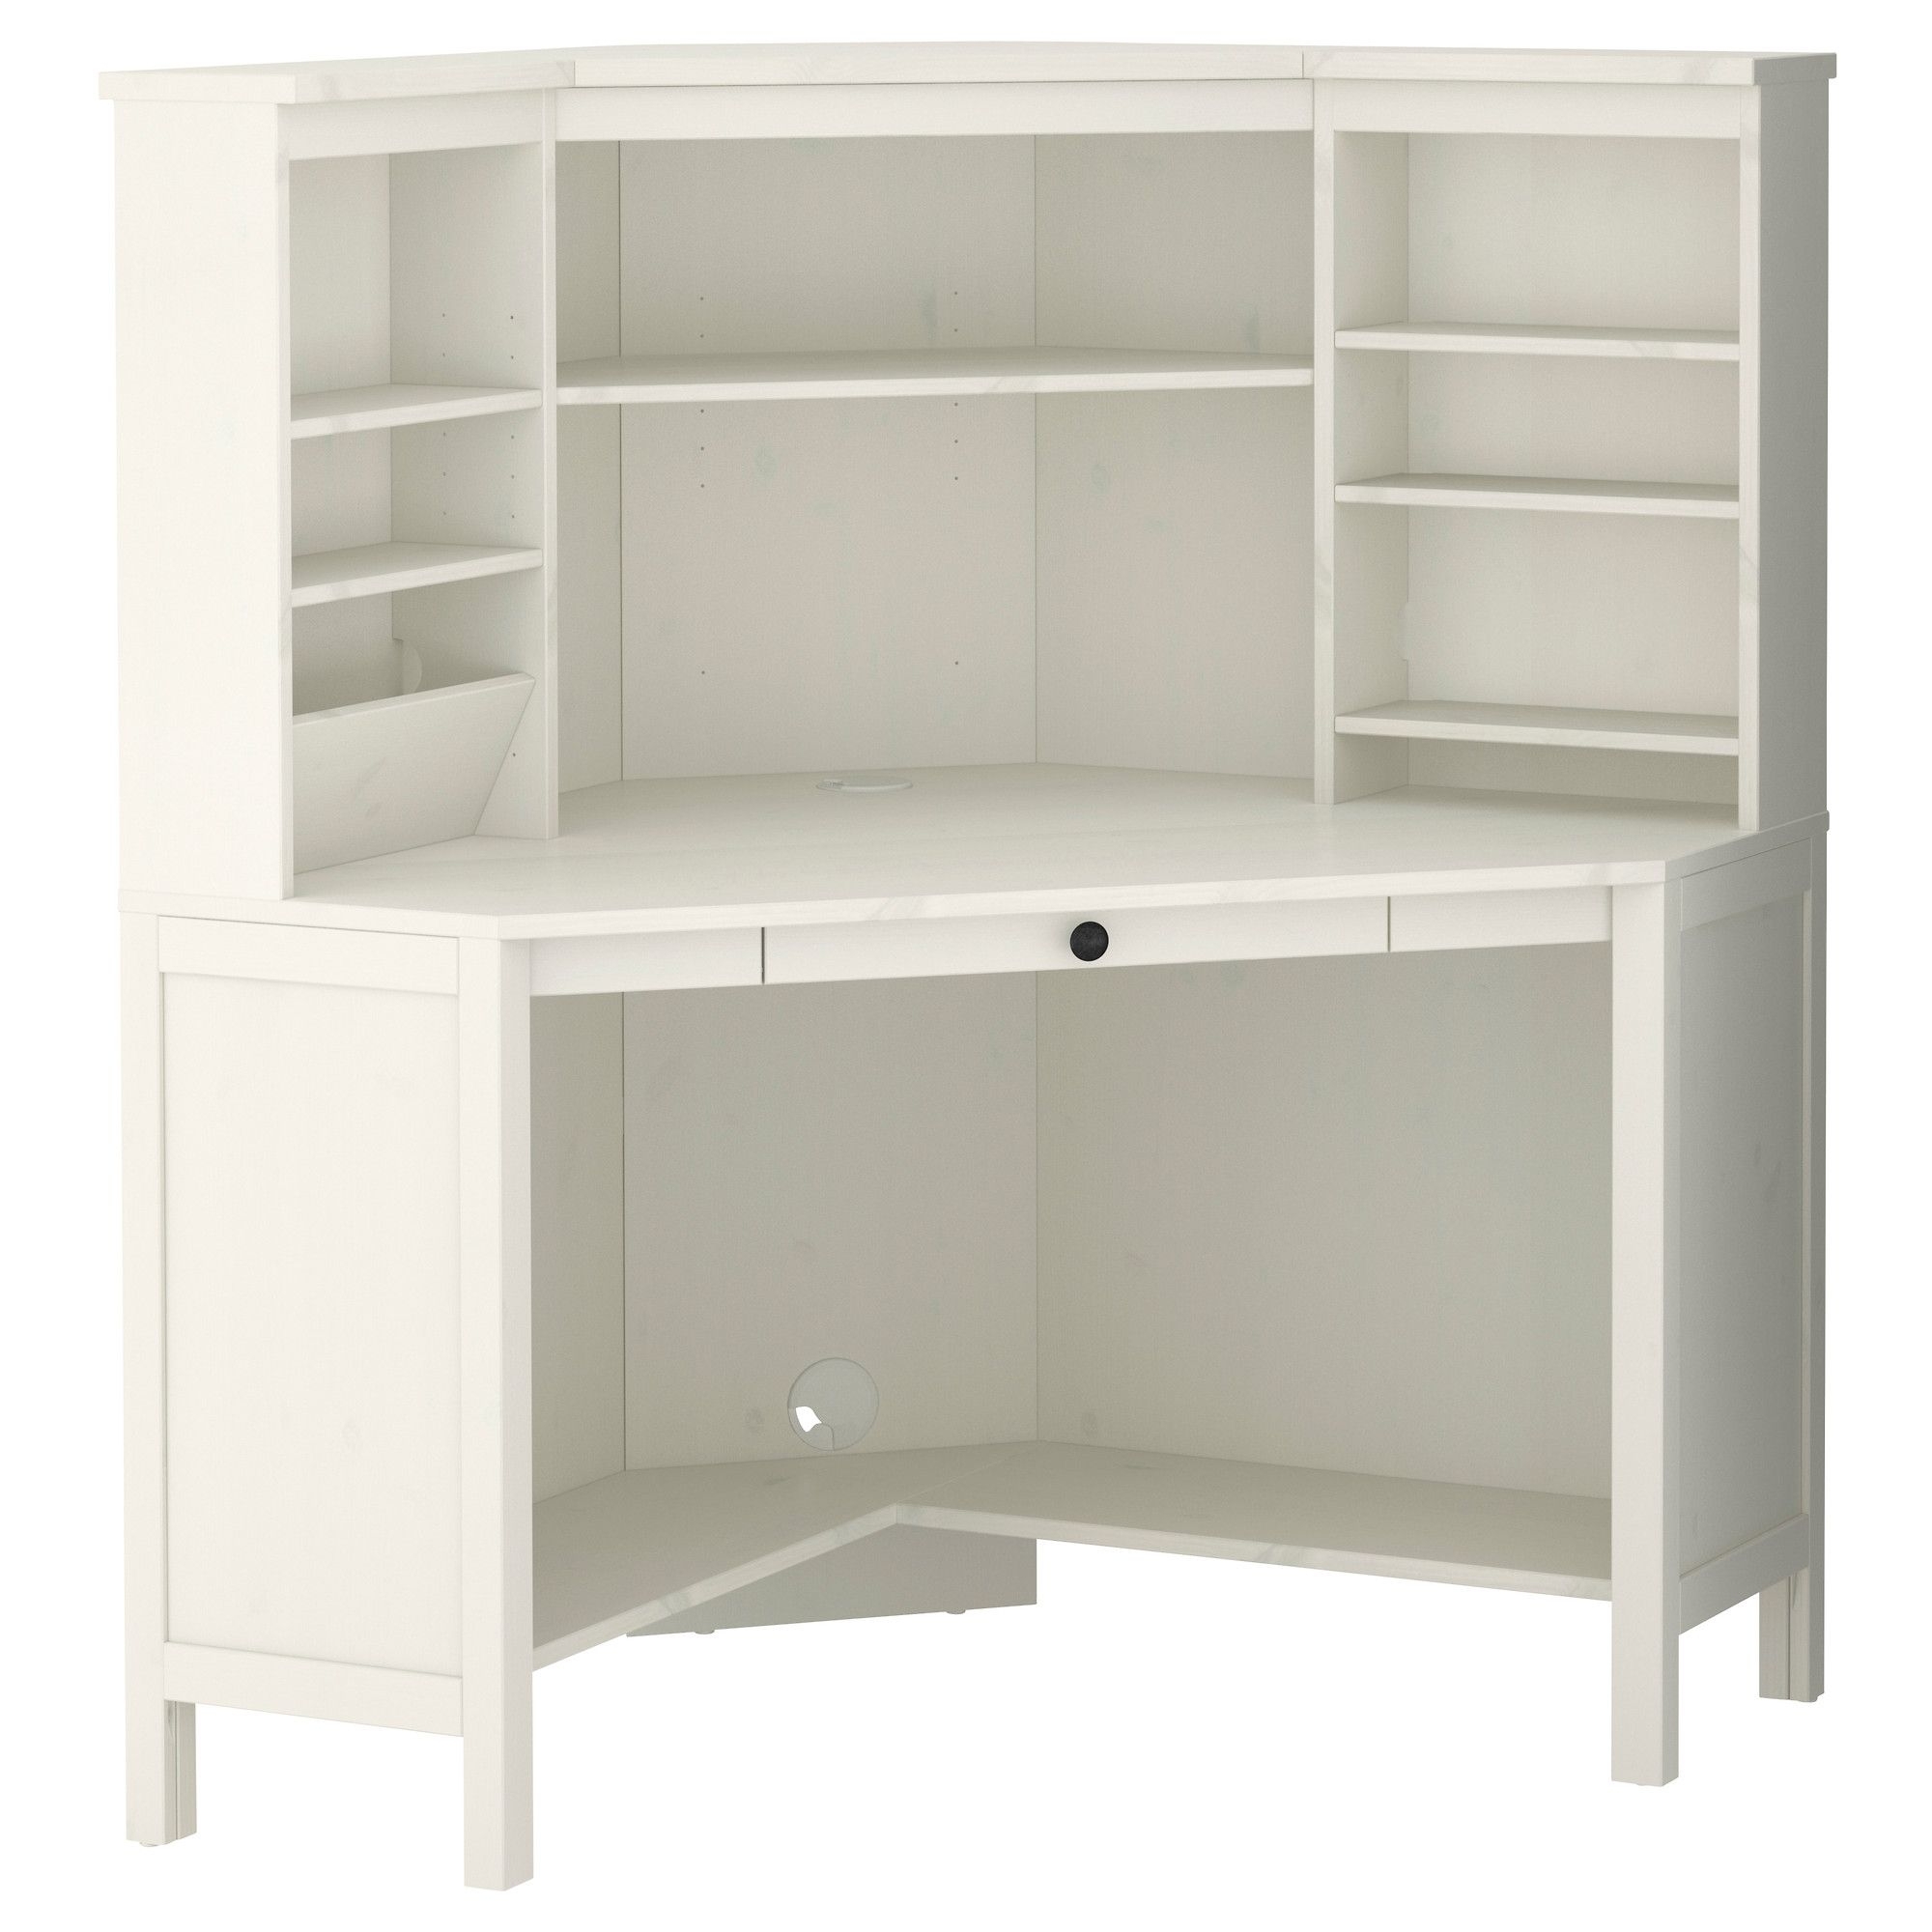 youth desk with storage